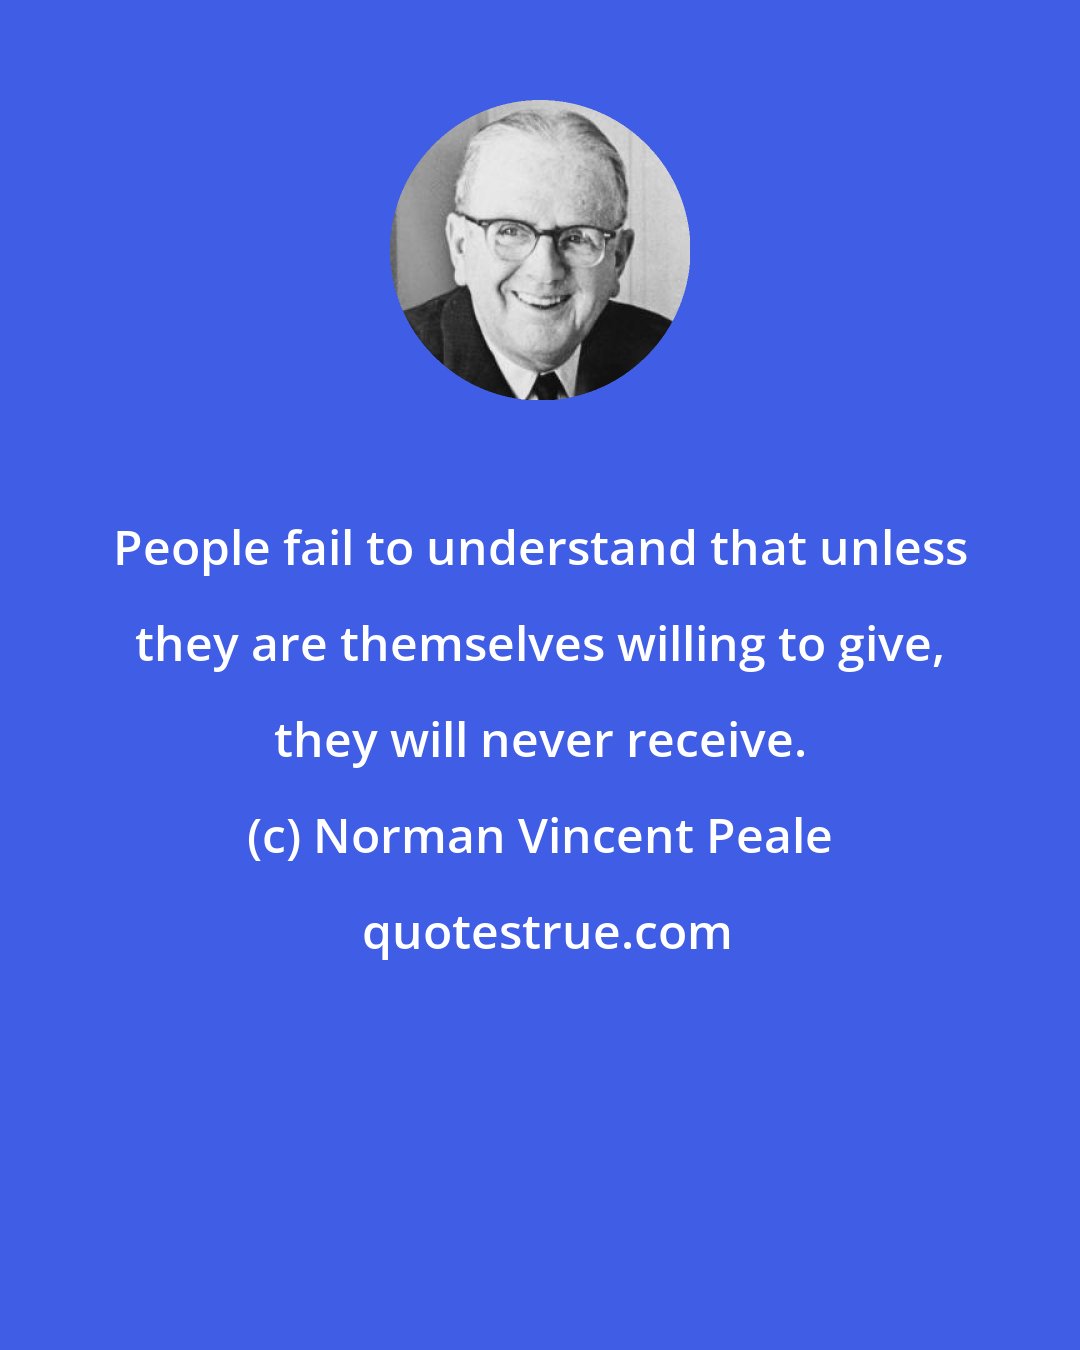 Norman Vincent Peale: People fail to understand that unless they are themselves willing to give, they will never receive.